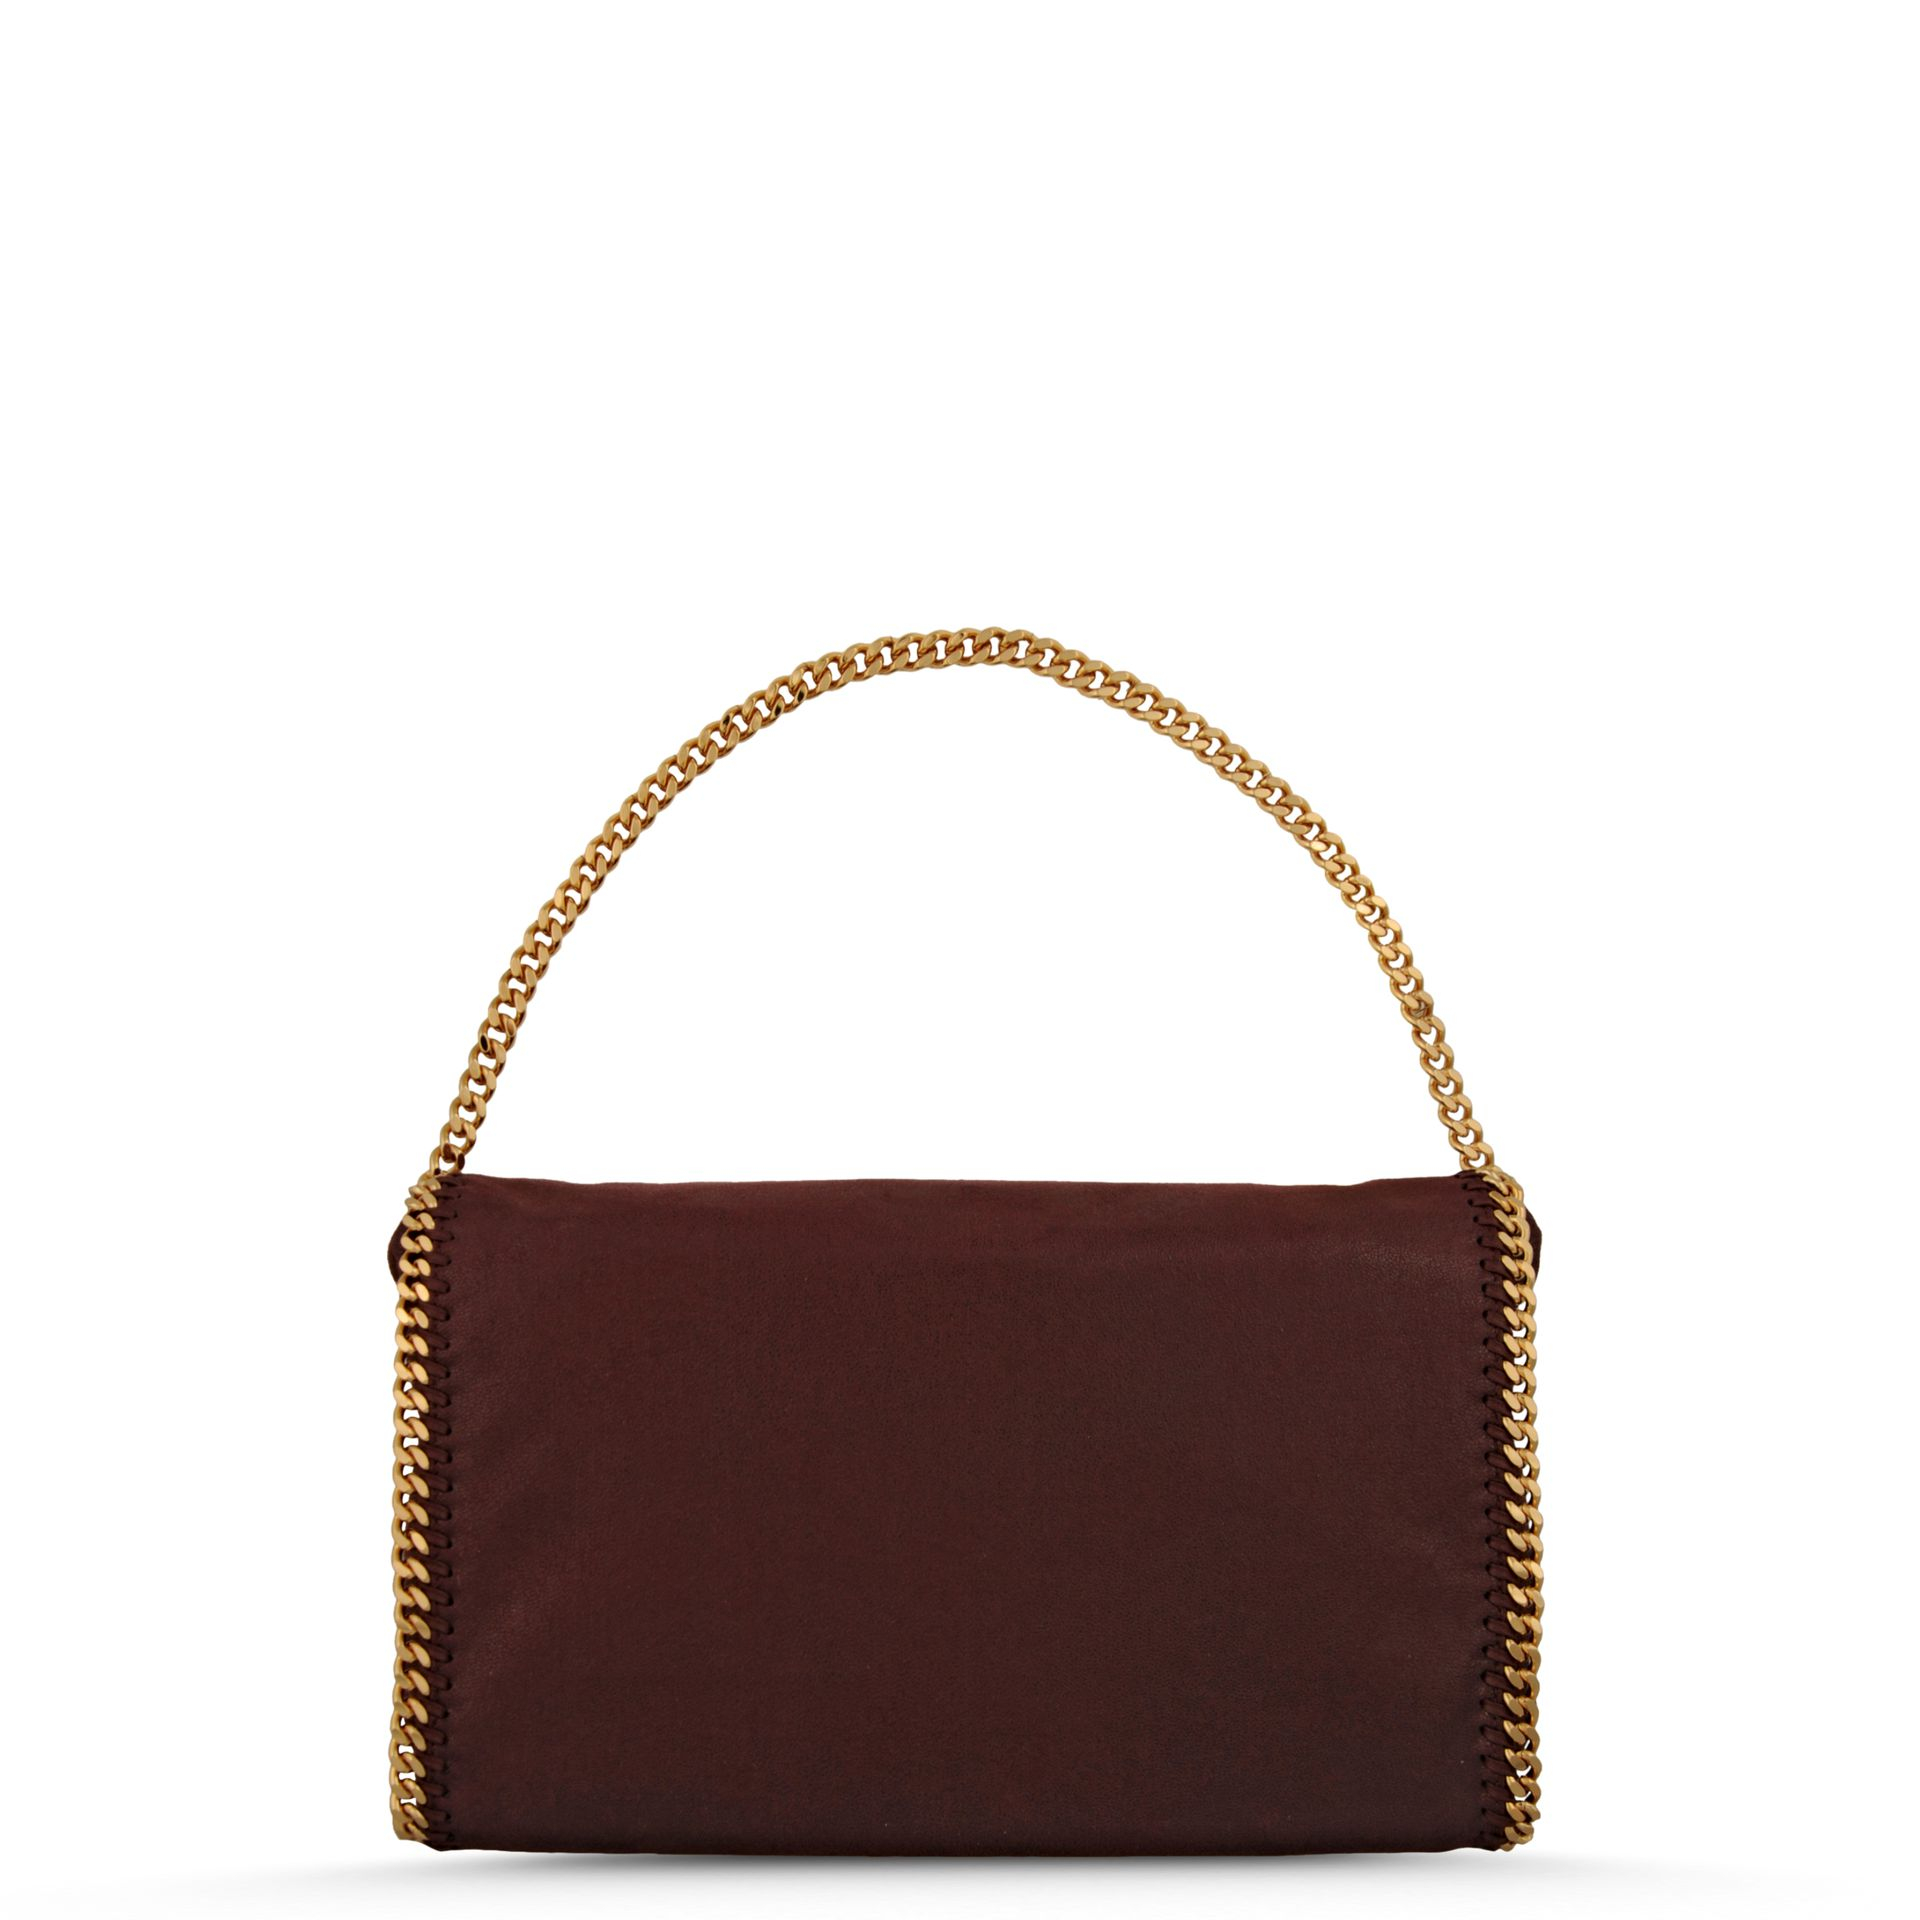 Stella McCartney Falabella Shaggy Deer Fold Over Tote in Gold 